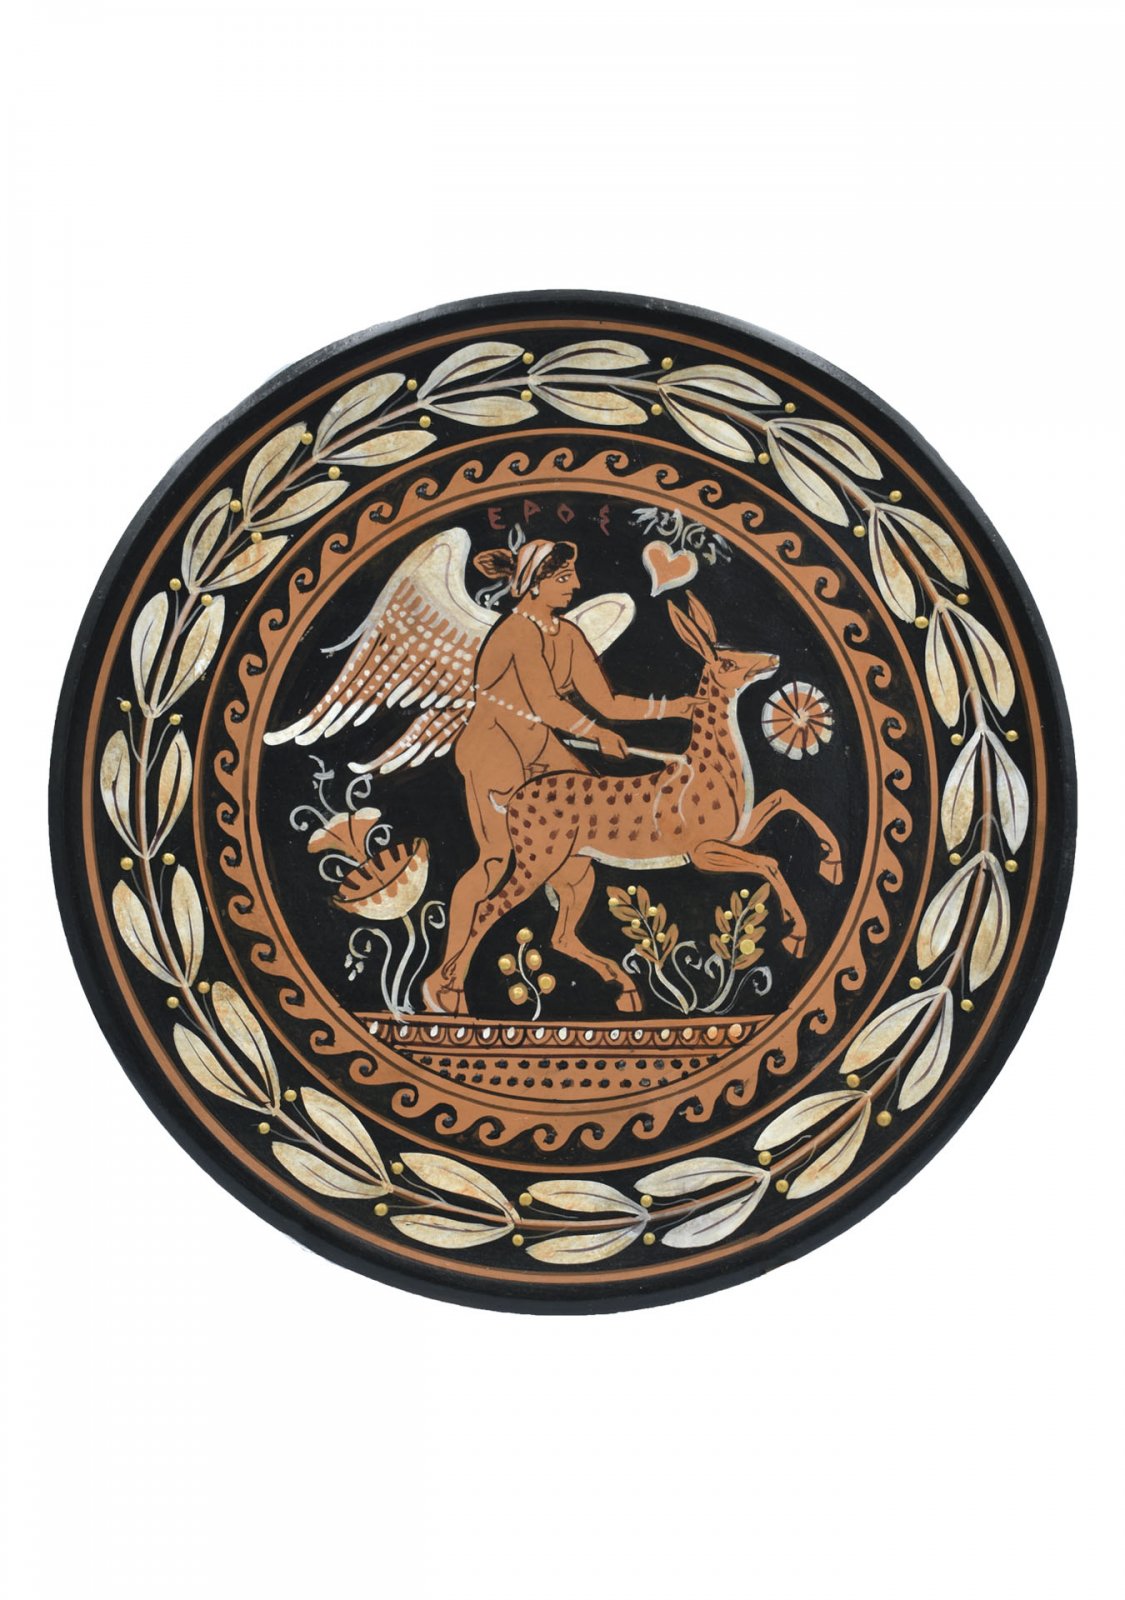 Greek ceramic plate depicting Eros, the Greek god of love, with a fawn